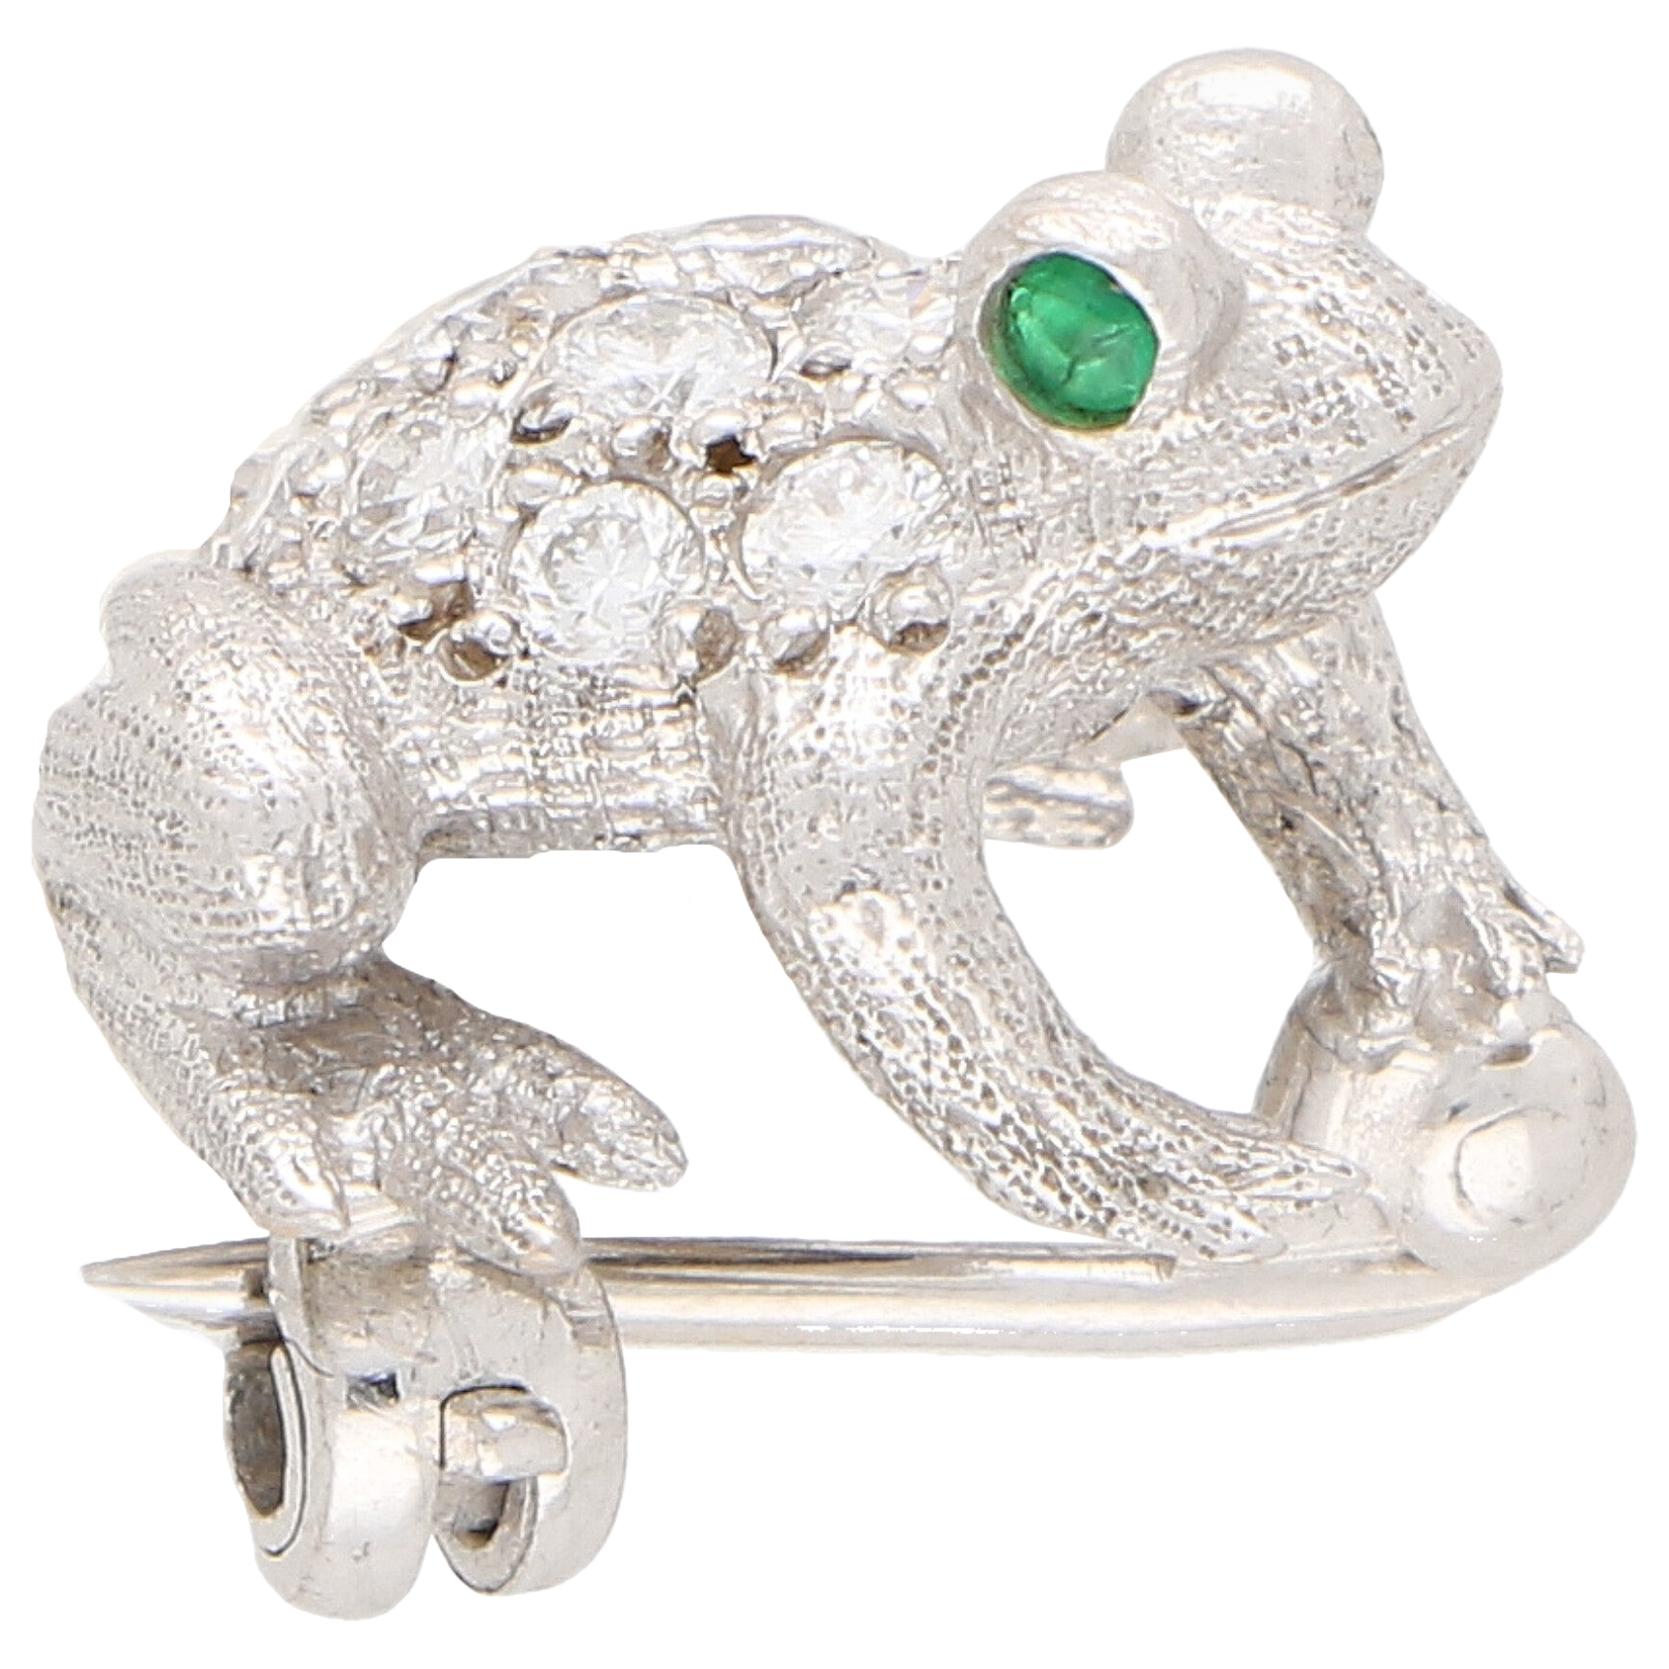 Diamond and Emerald Frog Pin Brooch Set in 18 Karat White Gold